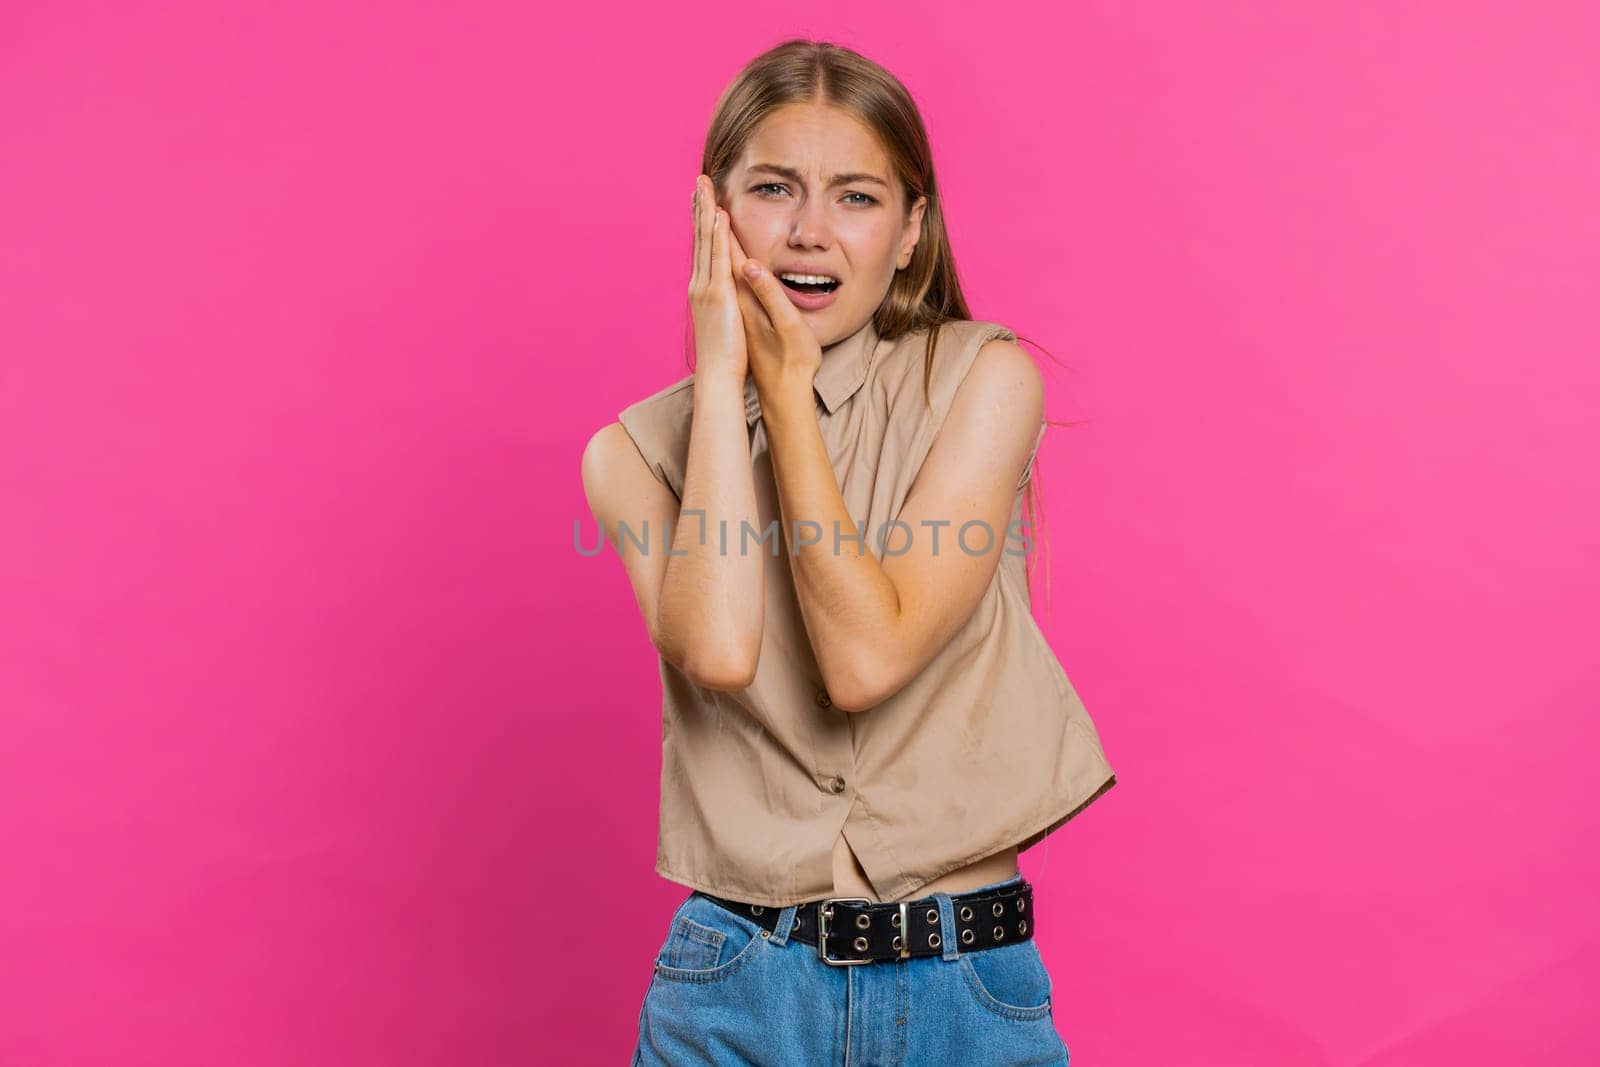 Dental problems. Young woman touching cheek, closing eyes with expression of terrible suffer from painful toothache, sensitive teeth, cavities. Pretty blonde girl isolated on pink studio background